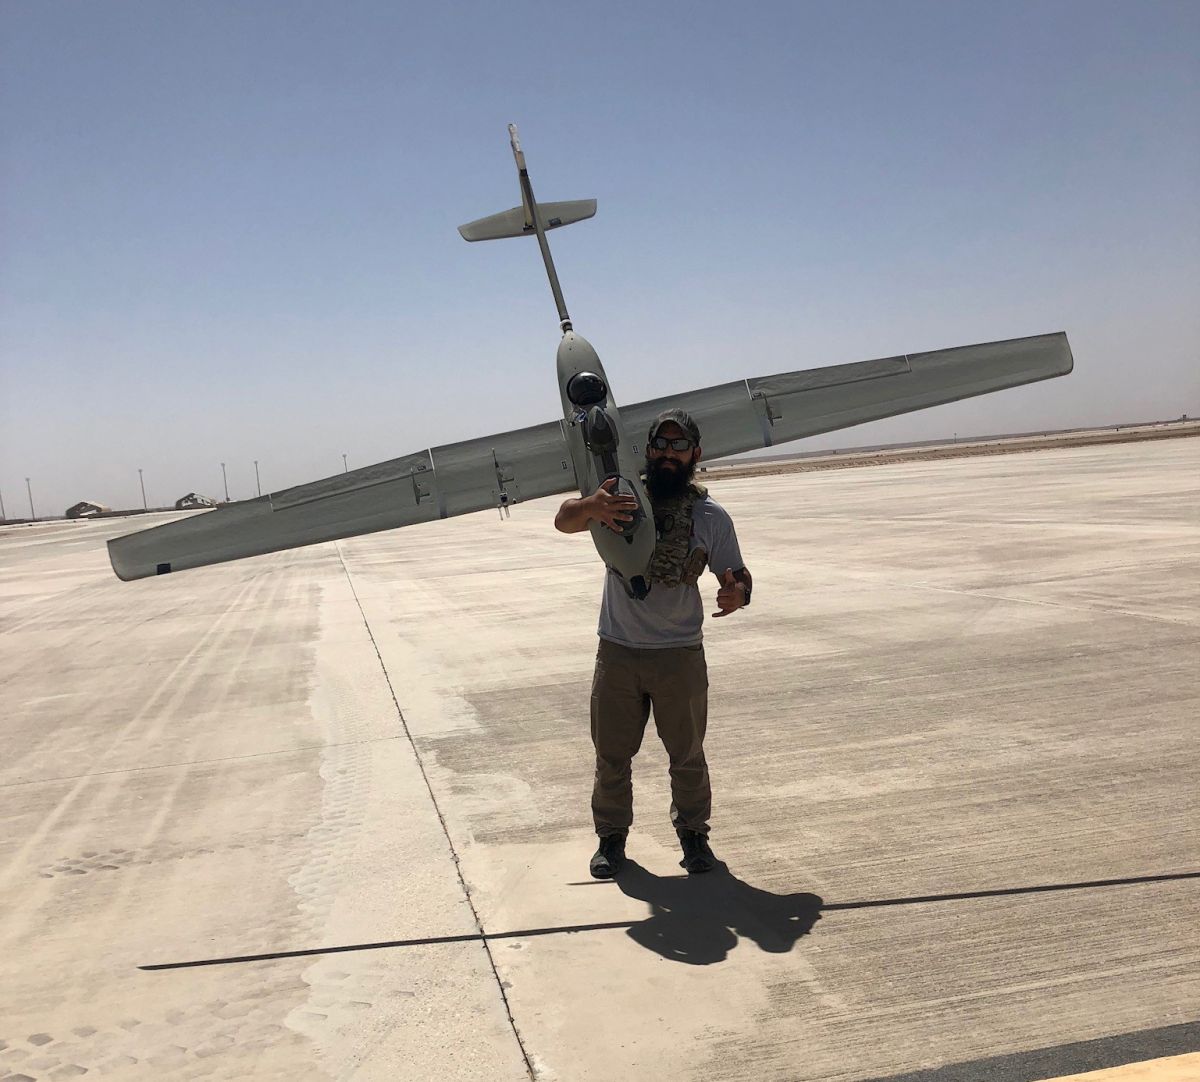 “Persistent ISR. Precision Integrated operators fly the Stalker UAV Overseas and here at Home daily.” - Precision’s Instagram